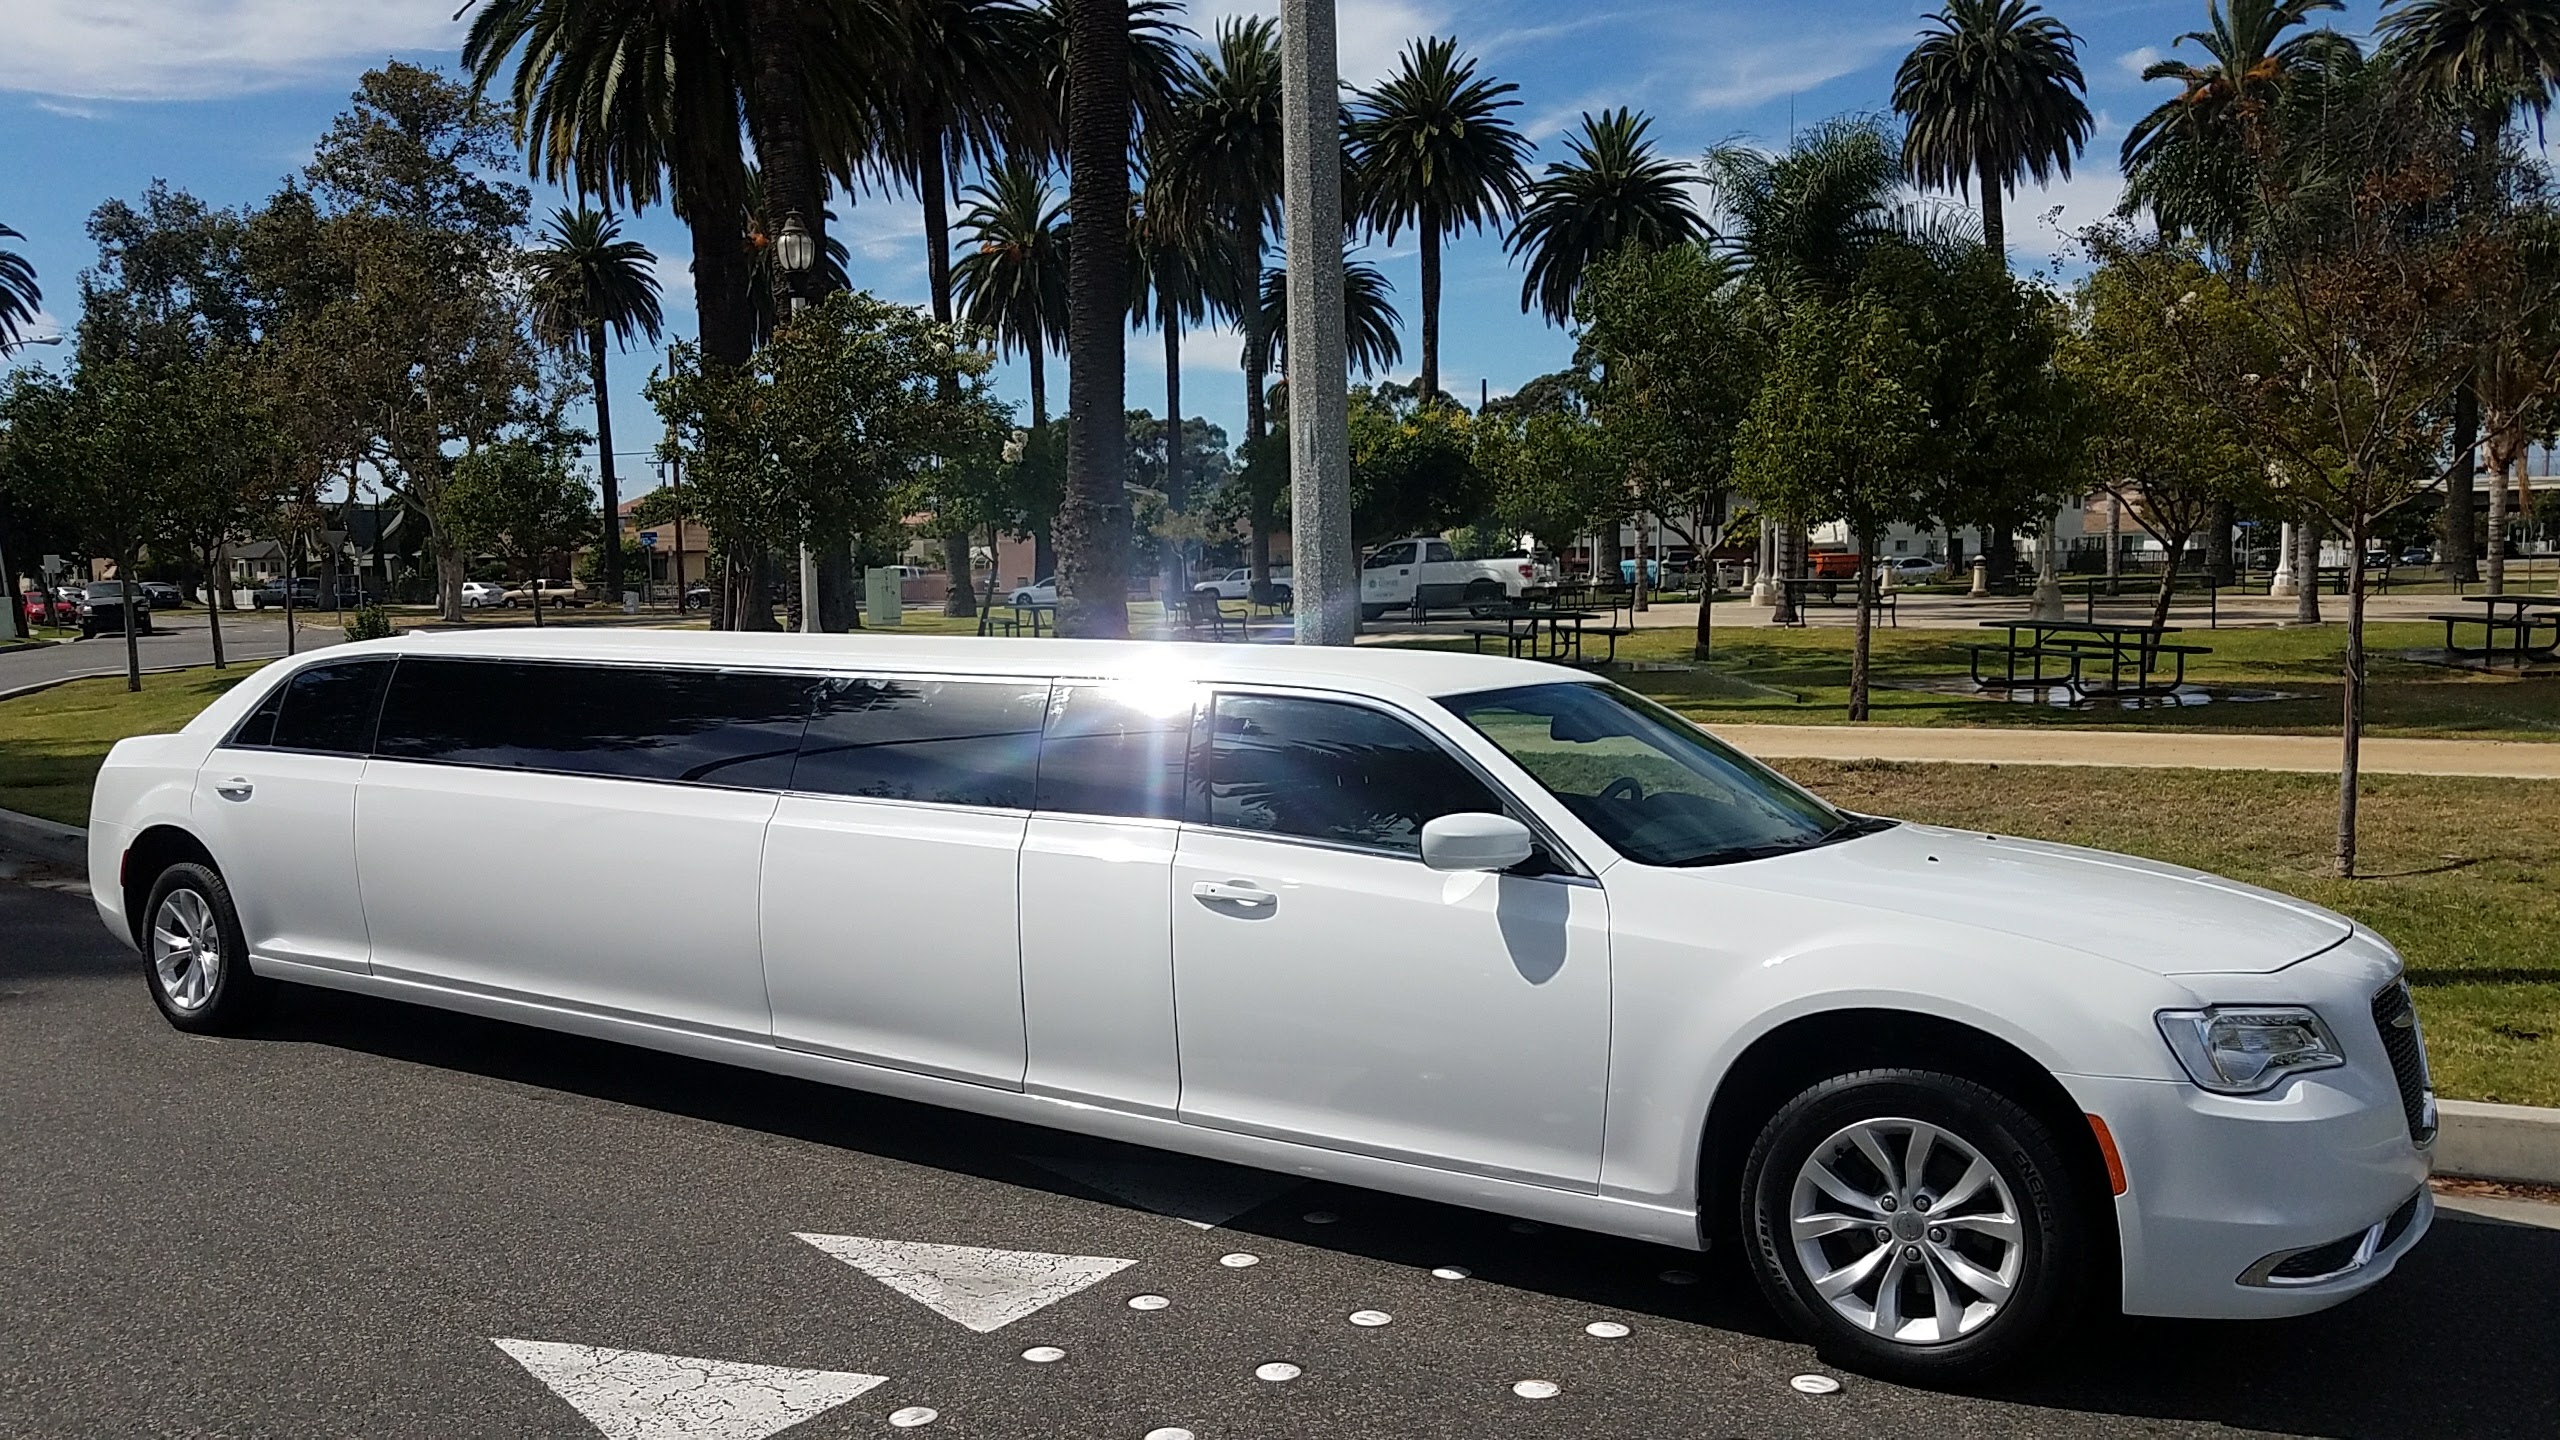 Five Door Chrysler 300 White 140-inch 2016 Limo For Sale #1251